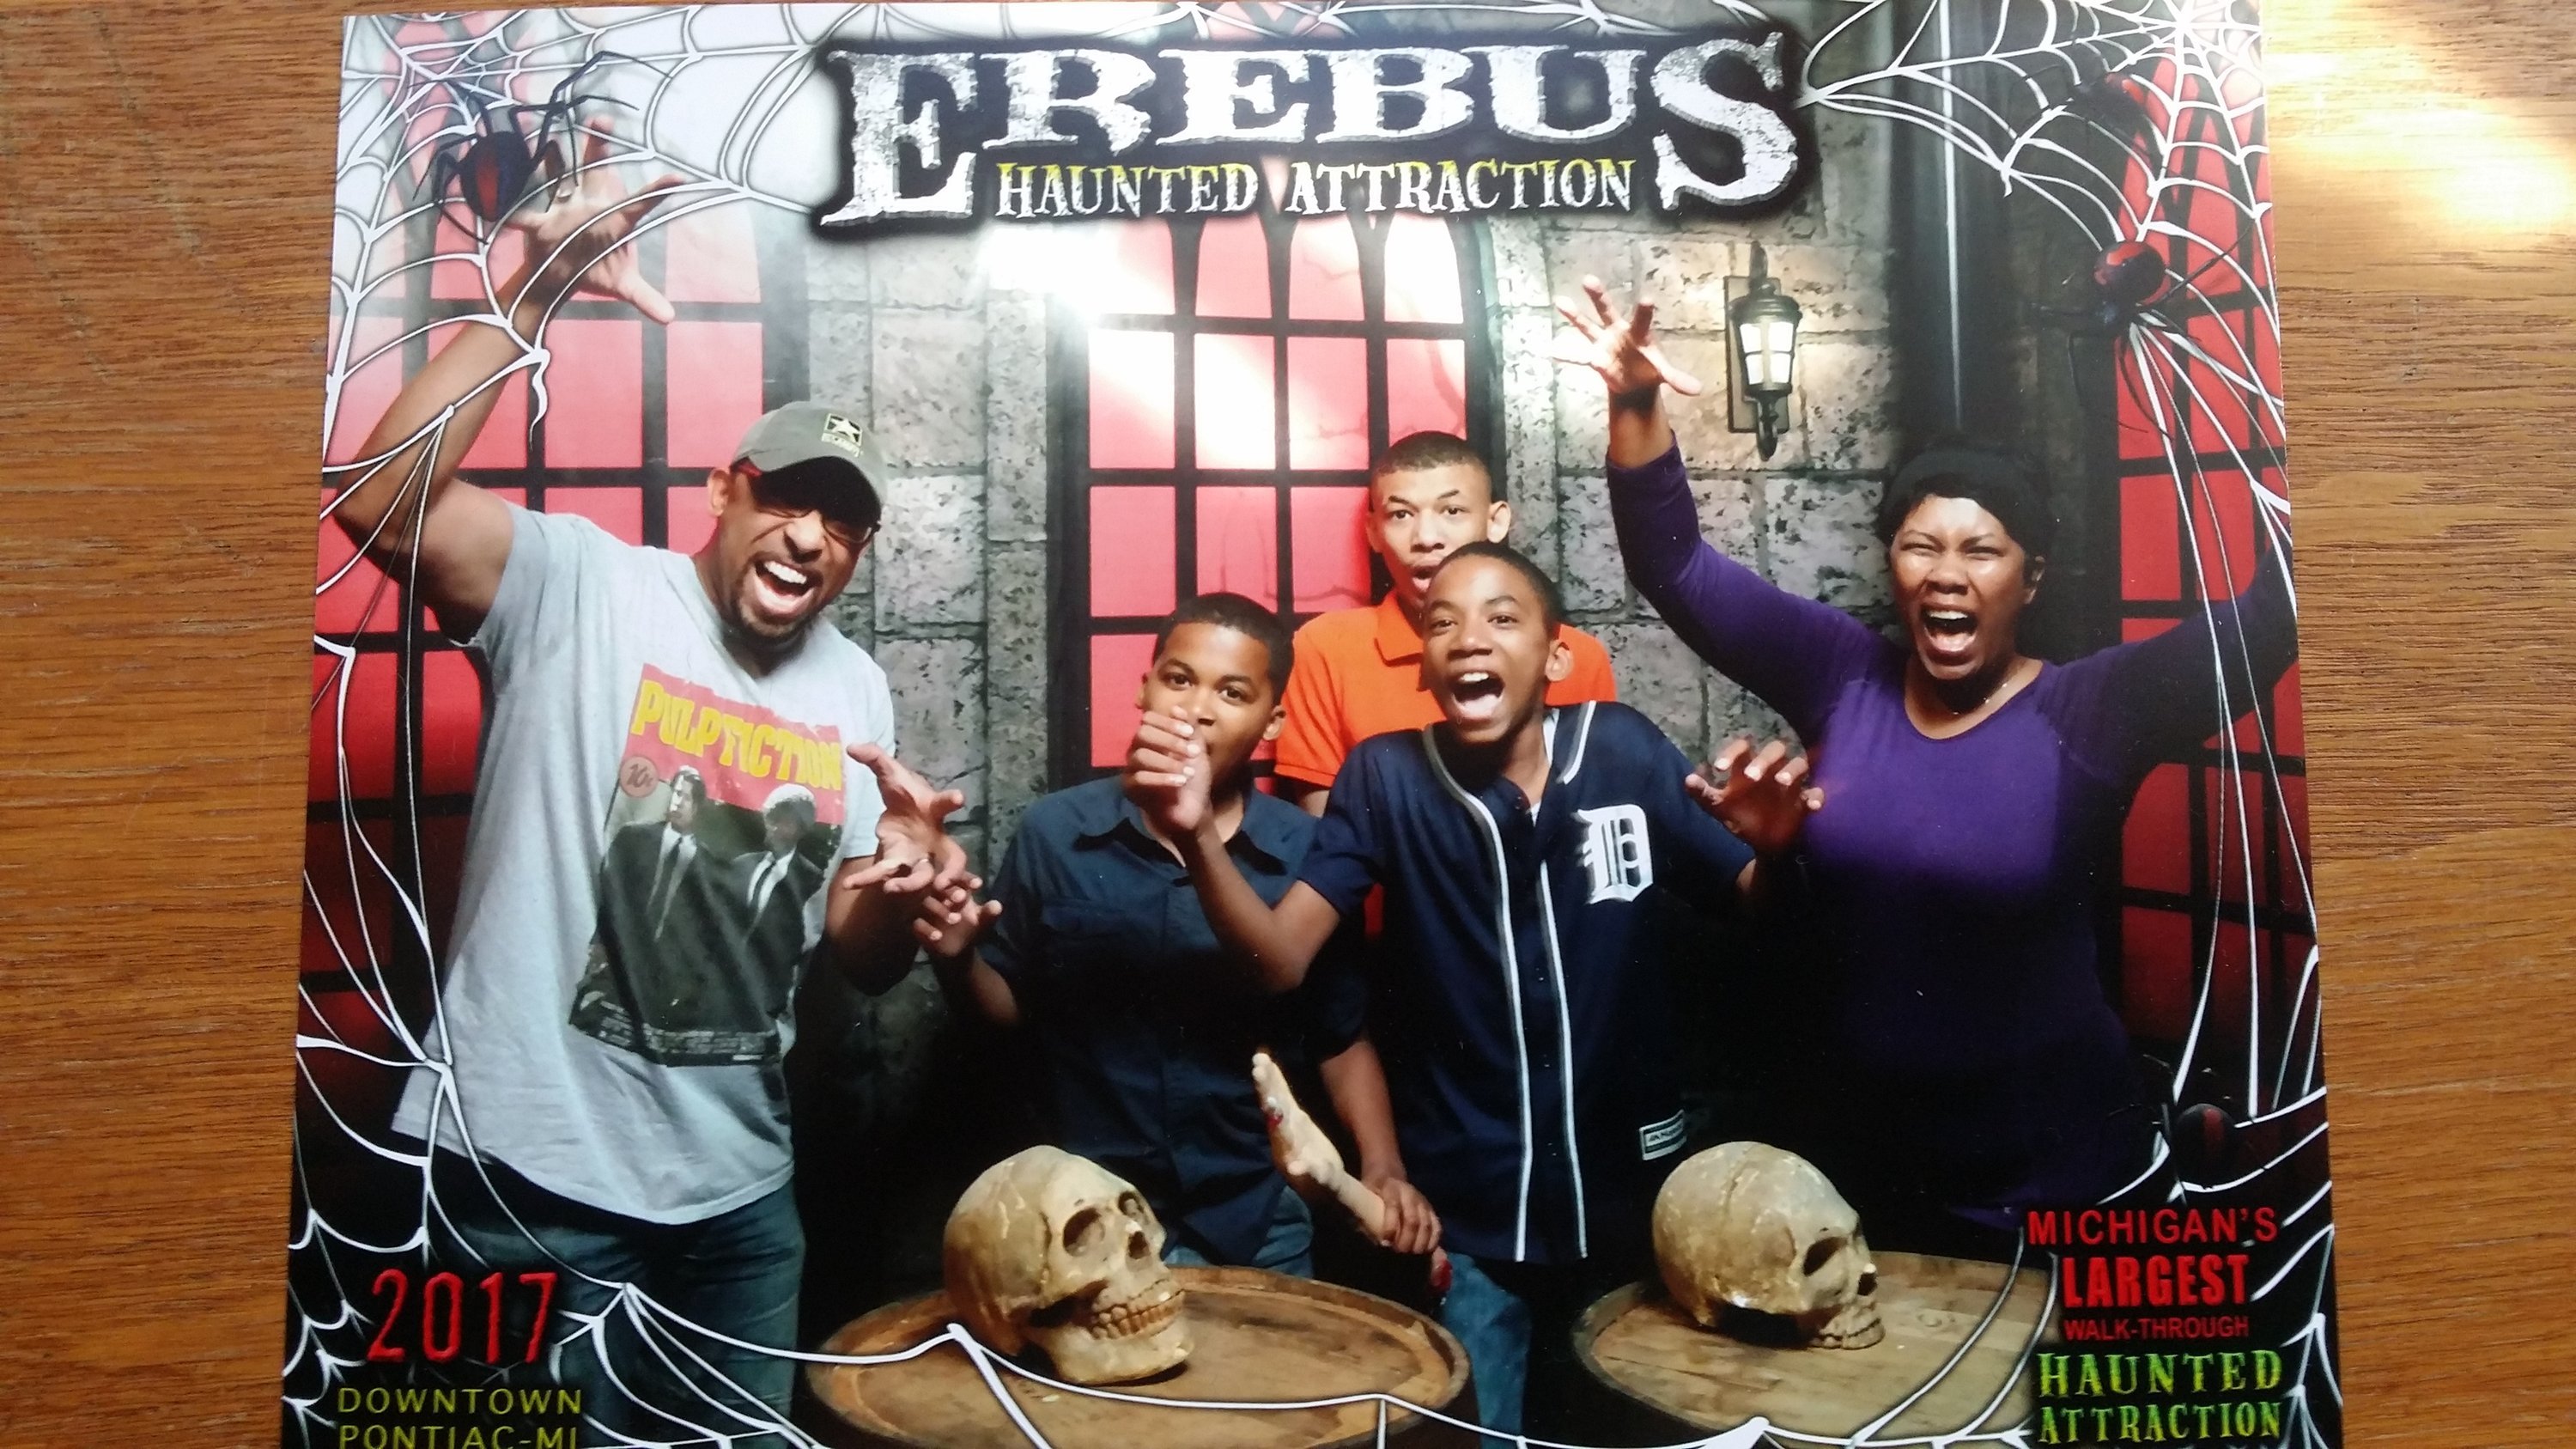 erebus haunted house coupons